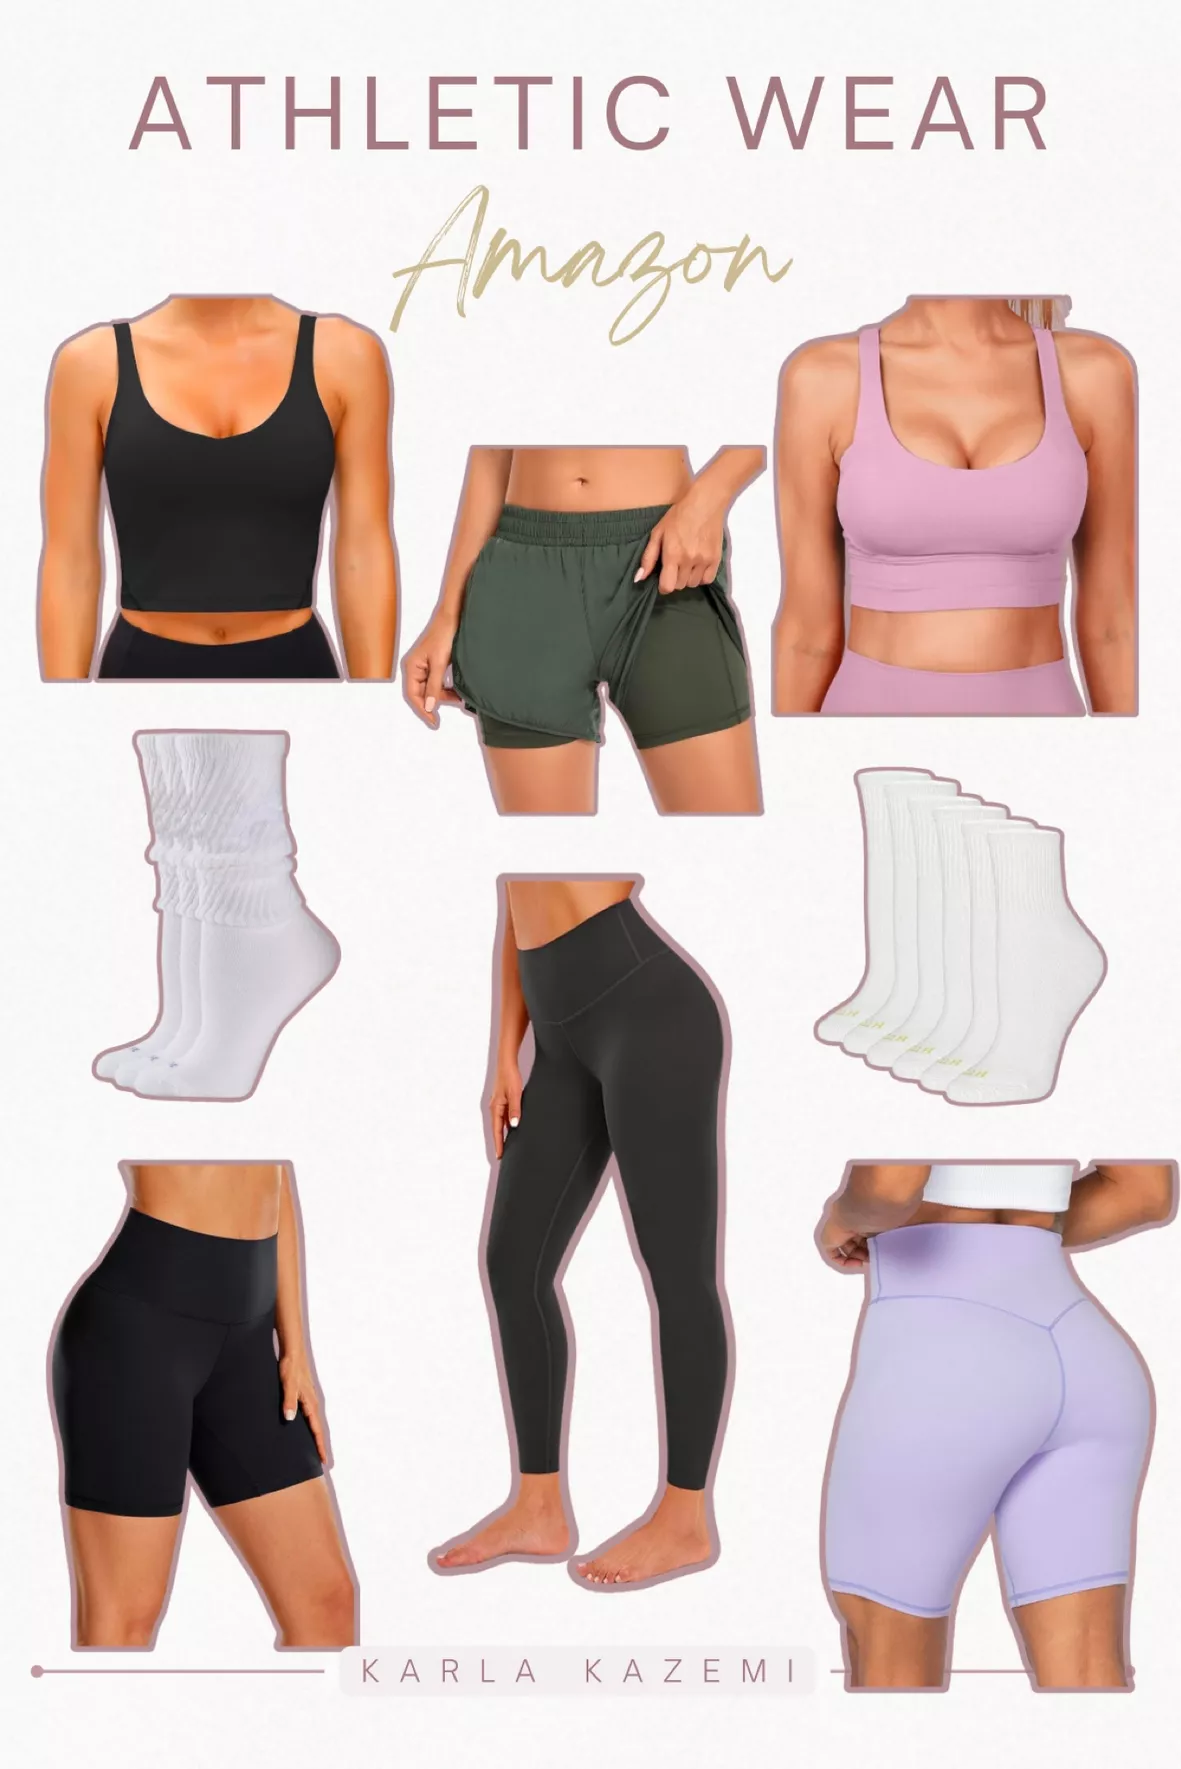 Sunzel Slimming Leggings Are Squat-Proof and a Gym Must-Have